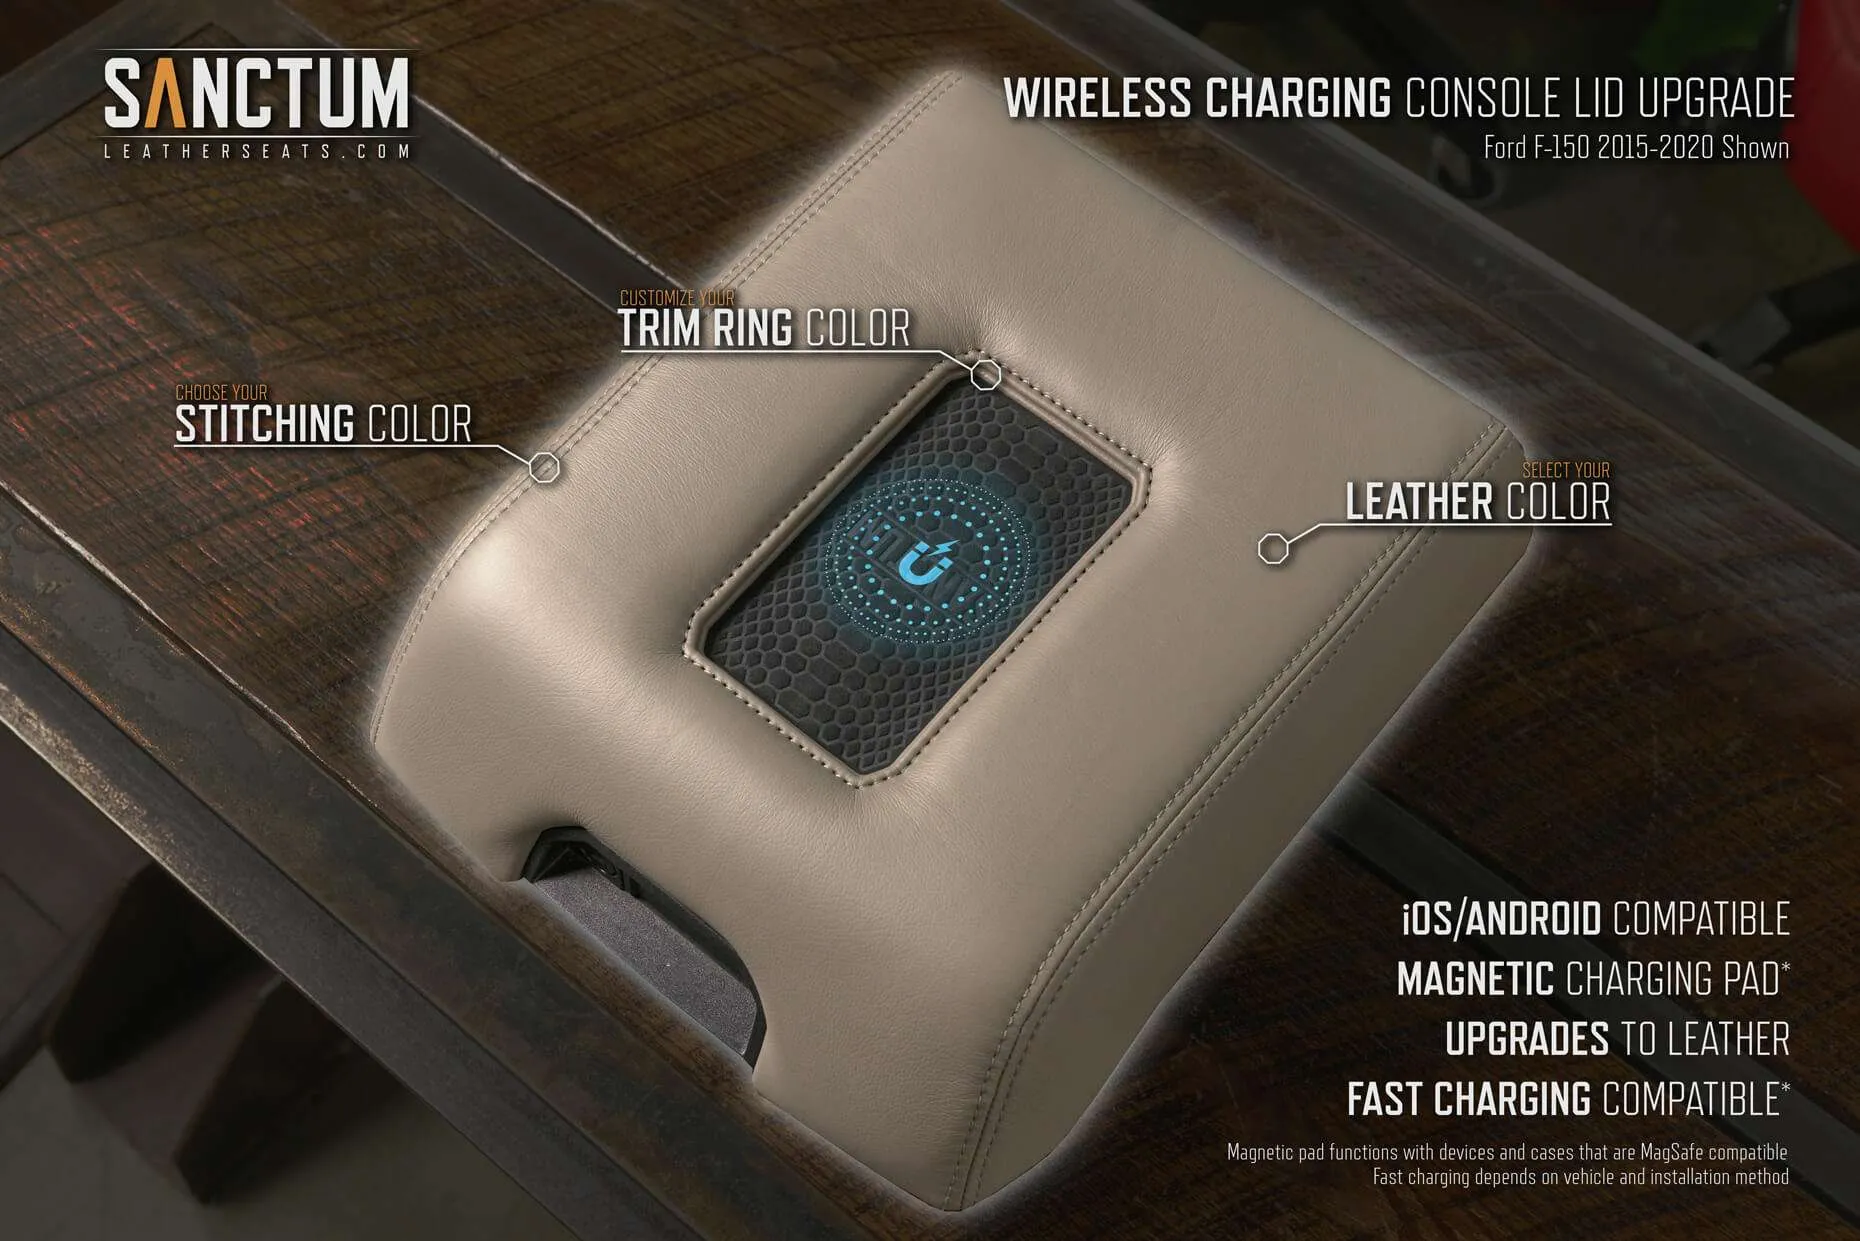 Ford F-150 2015-2020 Sanctum Wireless Charging Console Features